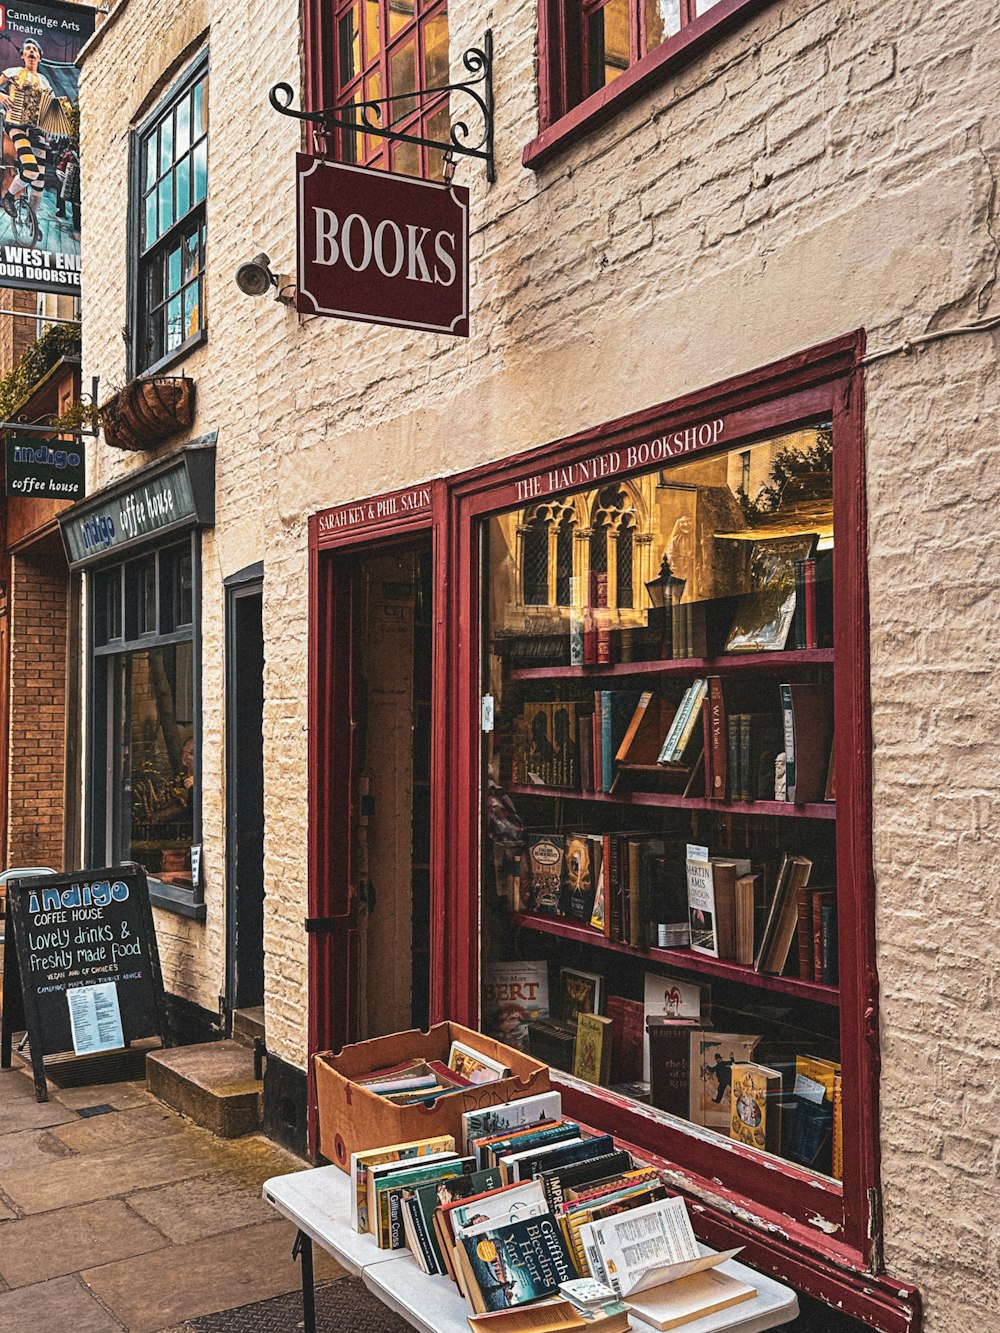 a book store on a street corner with books on display